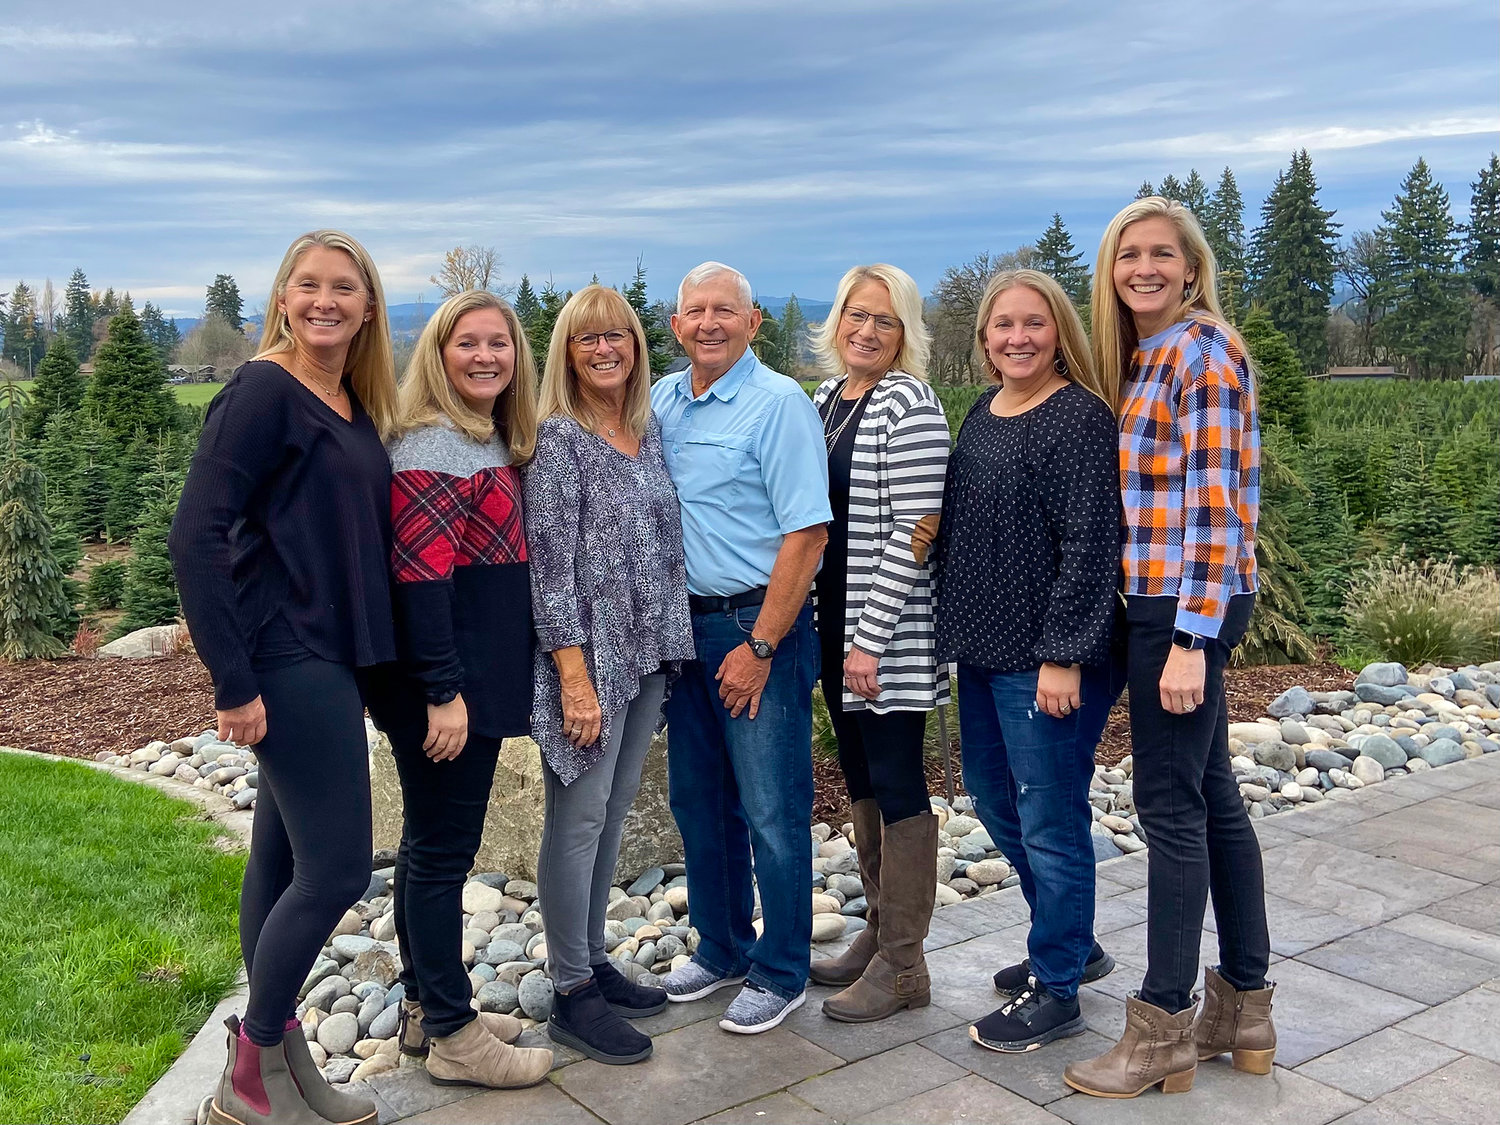 Bruce Wiseman and his wife, Nicki, are pictured with their five daughters ​​Wendi, Sara, Angie, Rachel and Amy.